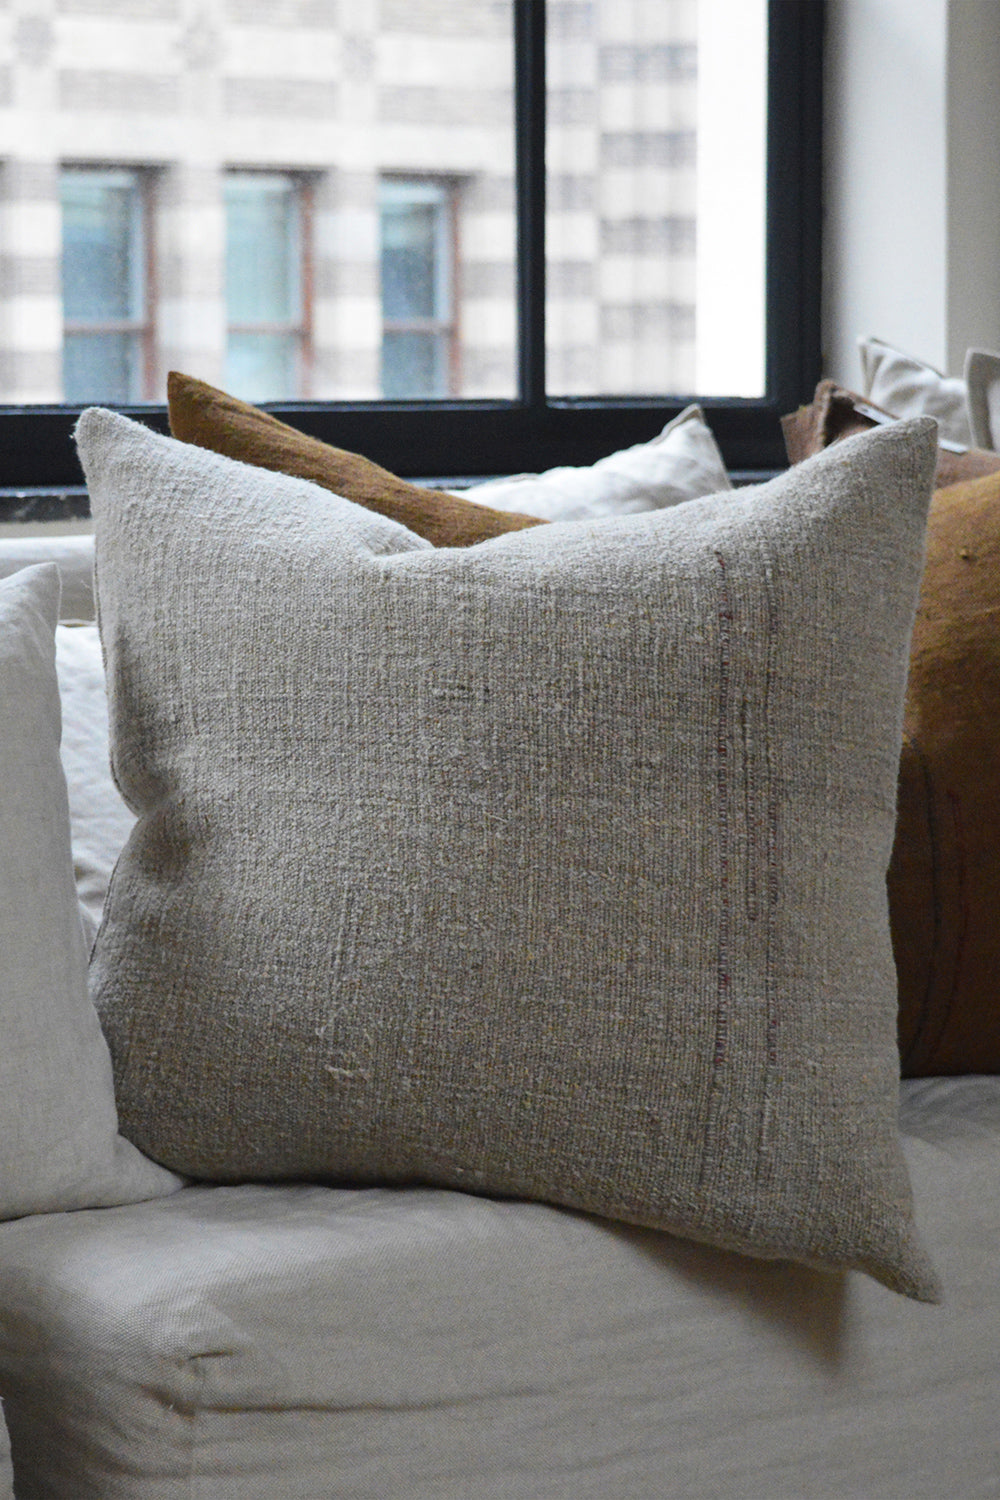 Antique Onsen Cushion by Isabelle Yamamoto at Enter The Loft.